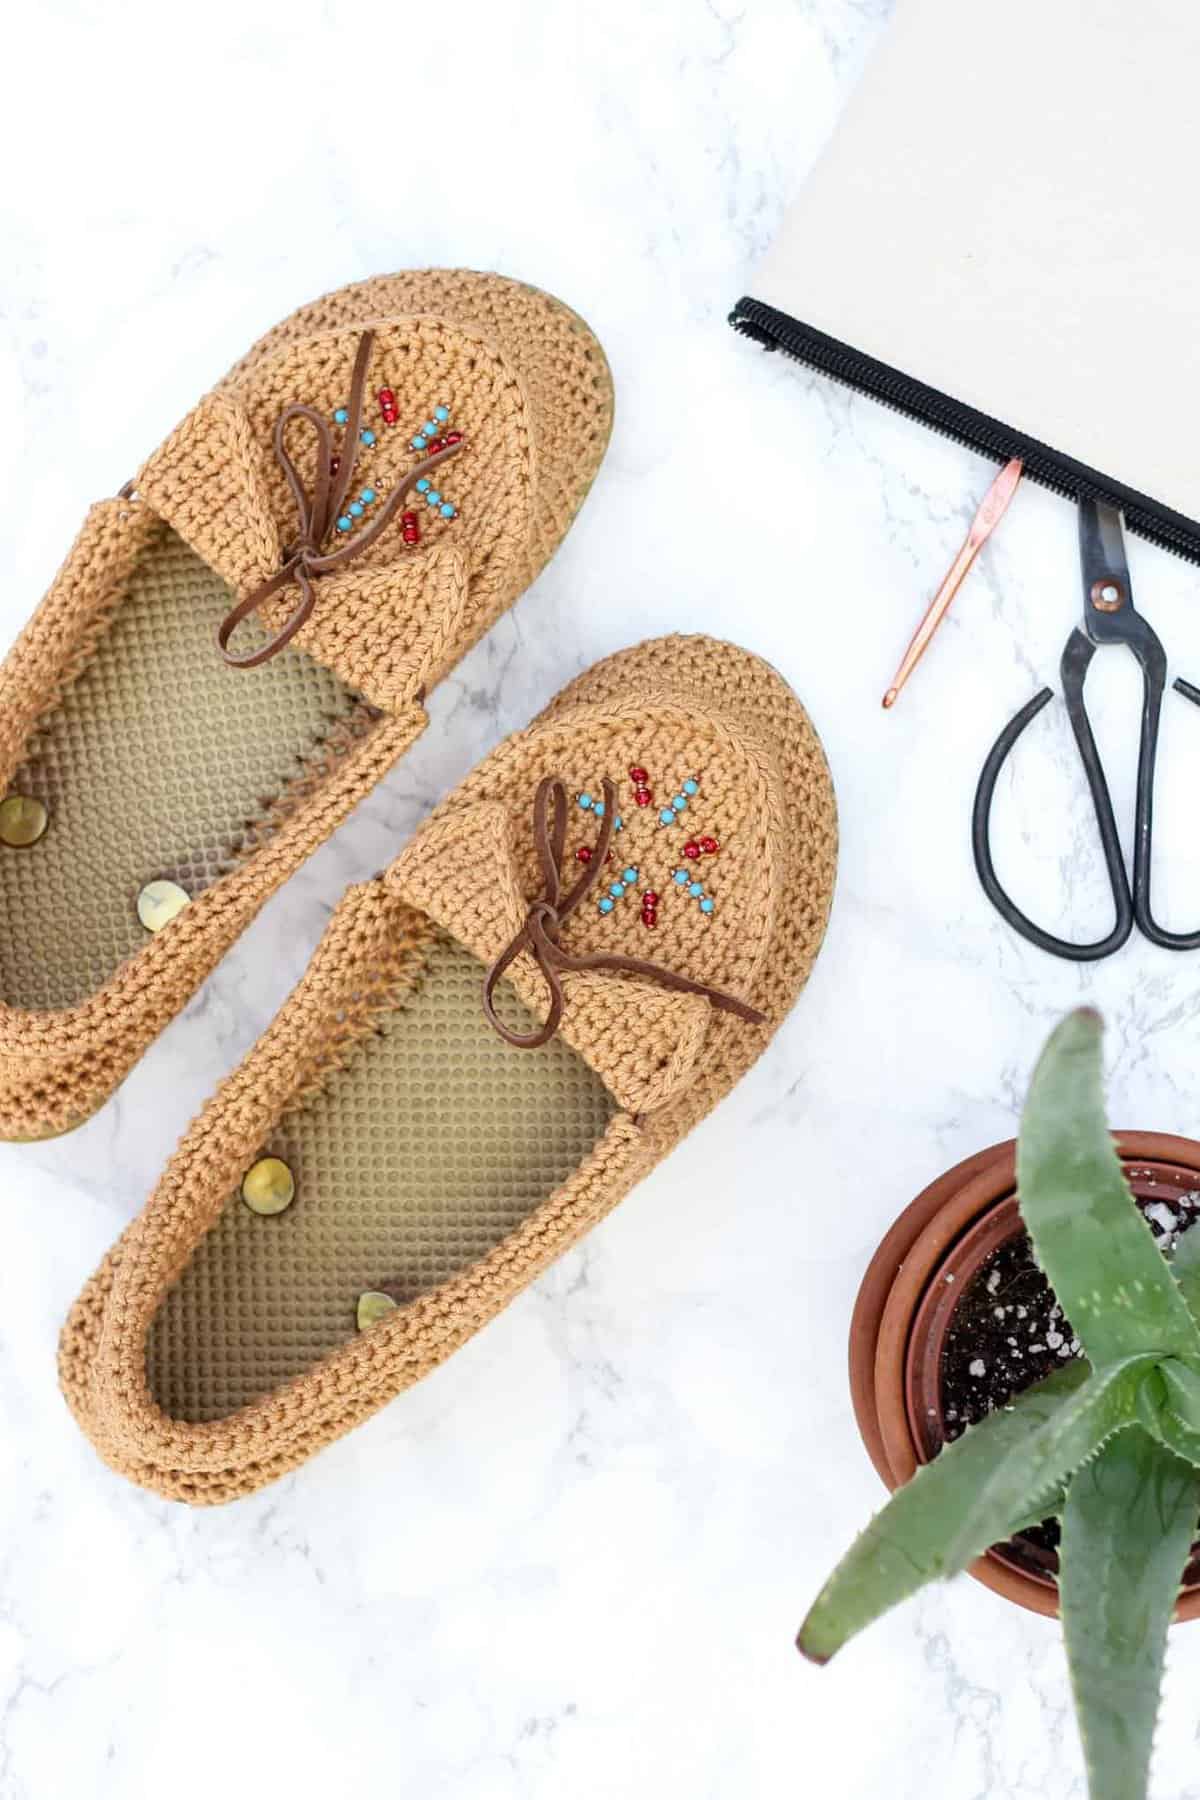 Learn how to crochet shoes with flip flop soles with this free crochet moccasin pattern and video tutorial! These crochet moccasins with seed bead detailing make super comfortable women's shoes or slippers and can be customized however you wish. Made from Lion Brand 24/7 Cotton in "Camel" color. 